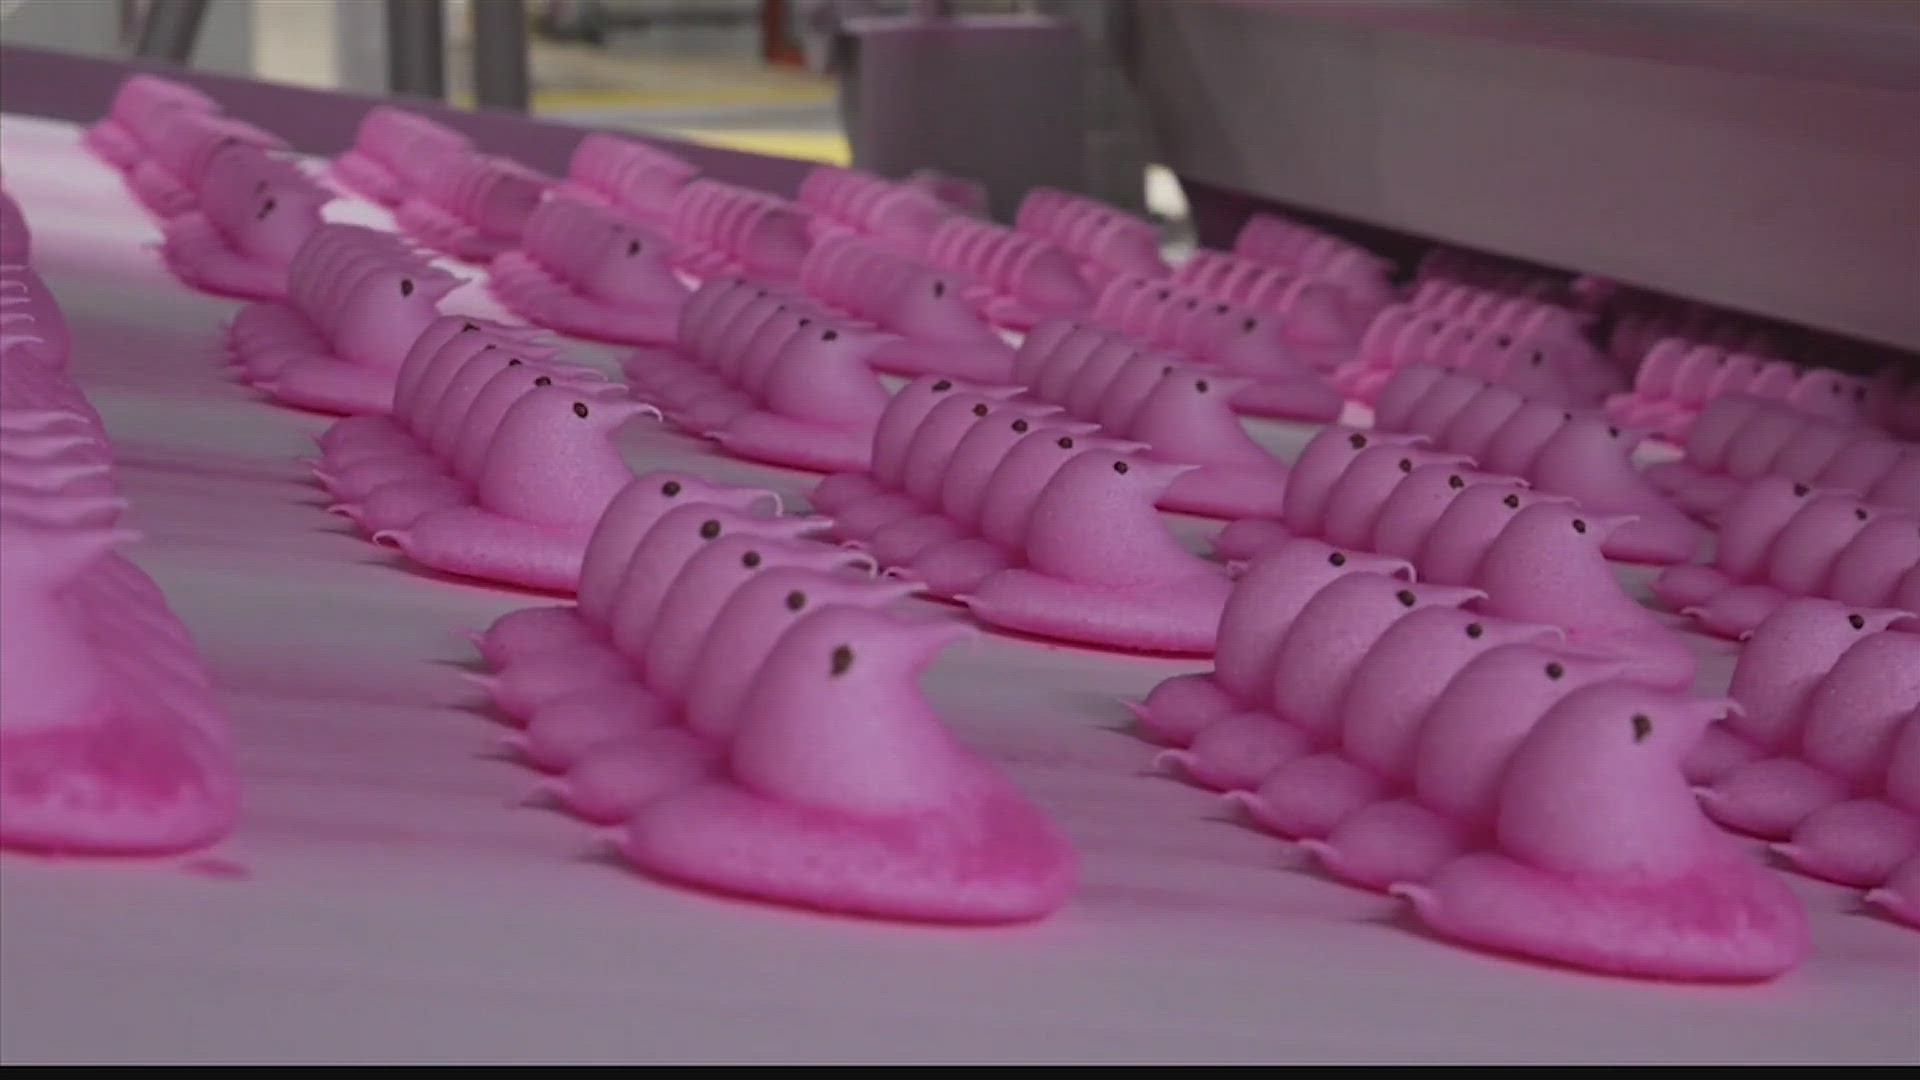 The Just Born factory in Bethlehem, PA is responsible for the marshmallowy Easter treat. Here's a behind the scenes tour plus a taste test with the FOX54 anchors.